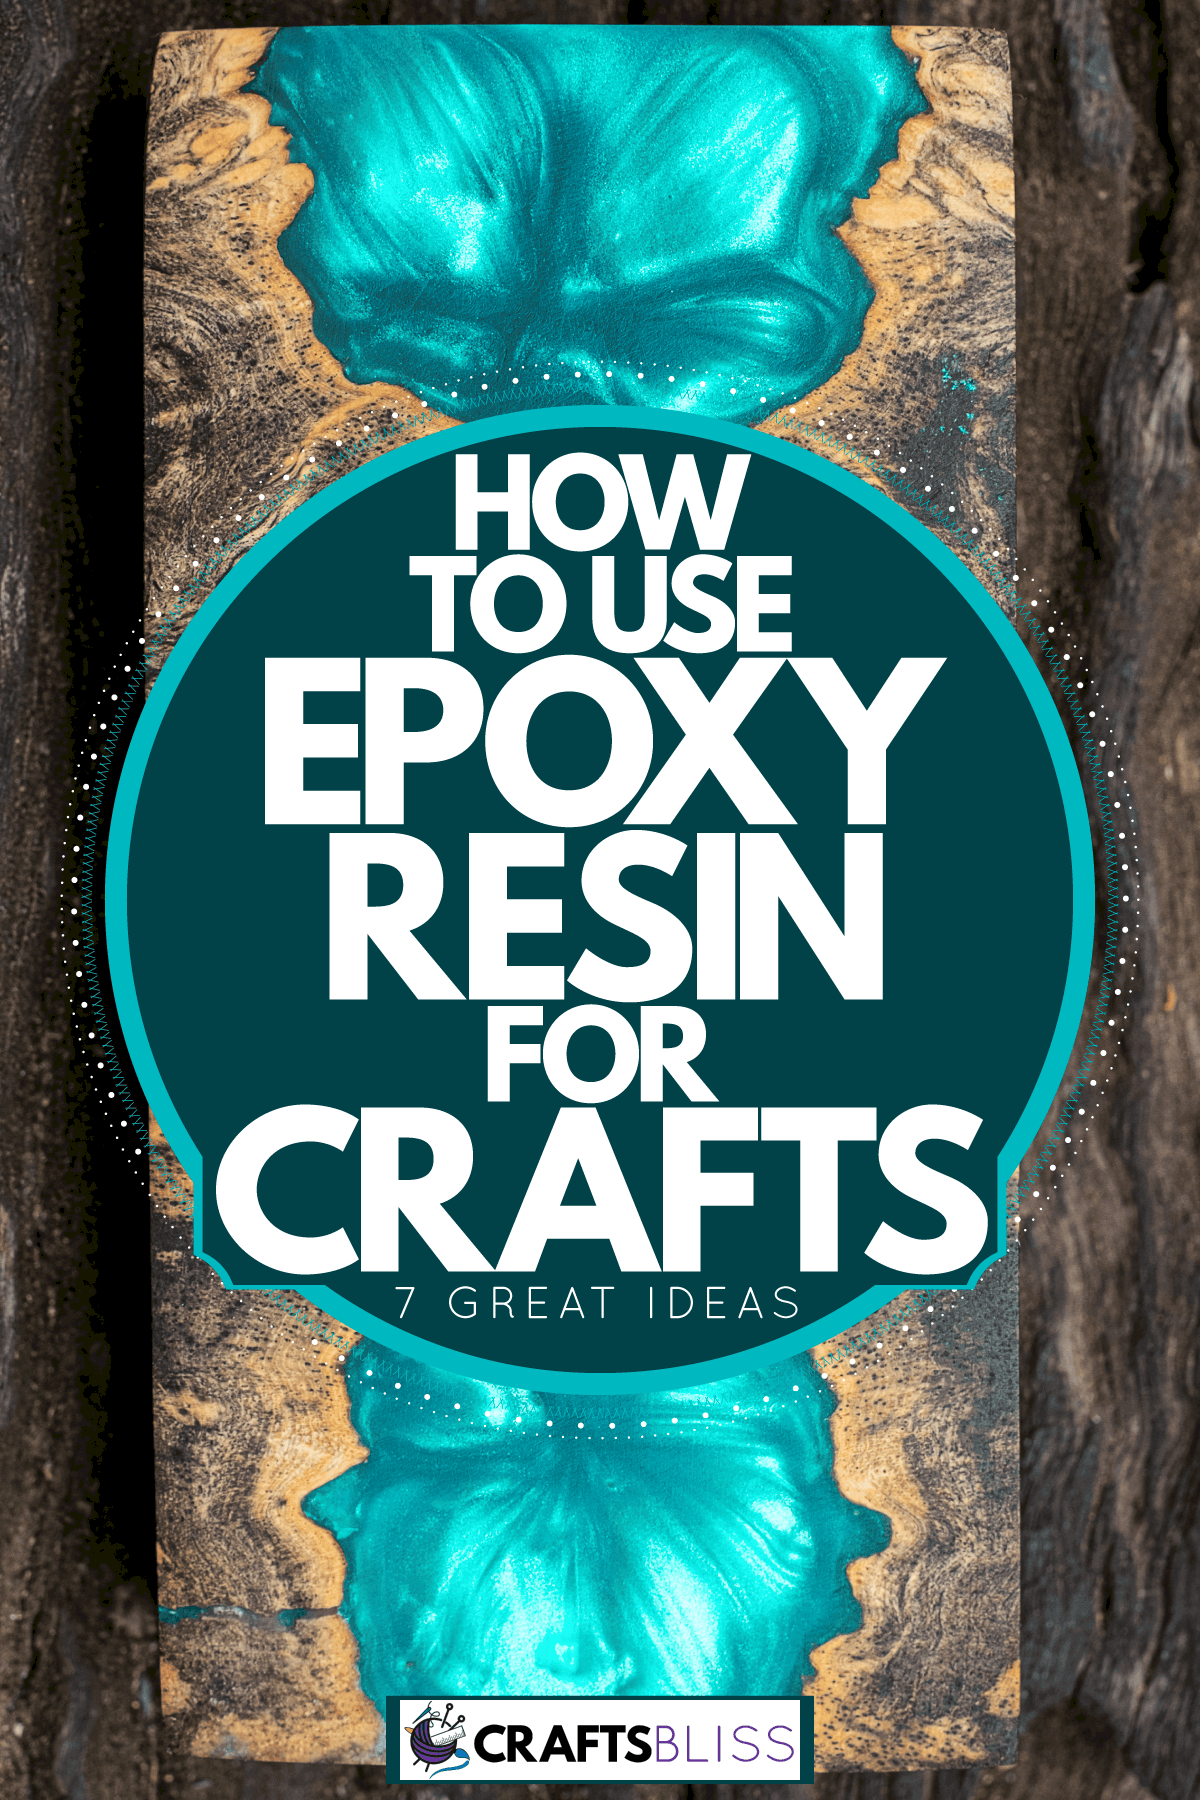 A breathtaking and stunning looking wooden chestnut table with an epoxy resin design in the middle, How To Use Epoxy Resin For Crafts [7 Great Ideas]